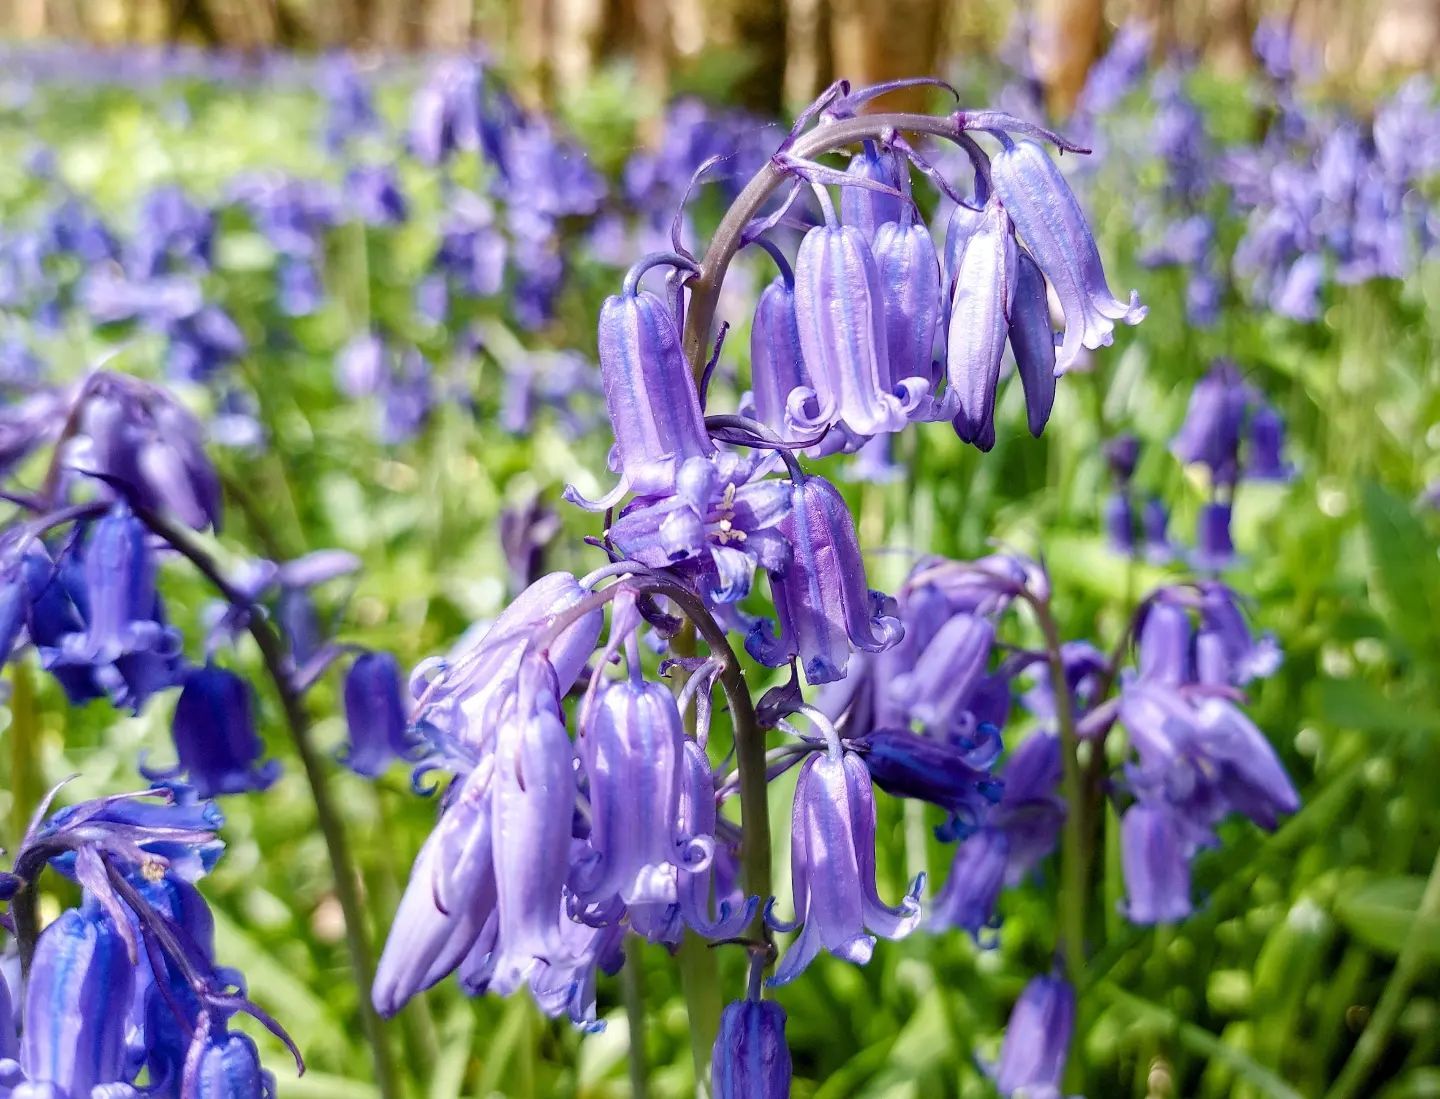 Chris Hailstones photo of bluebells in Harebushes Wood, Cirencester